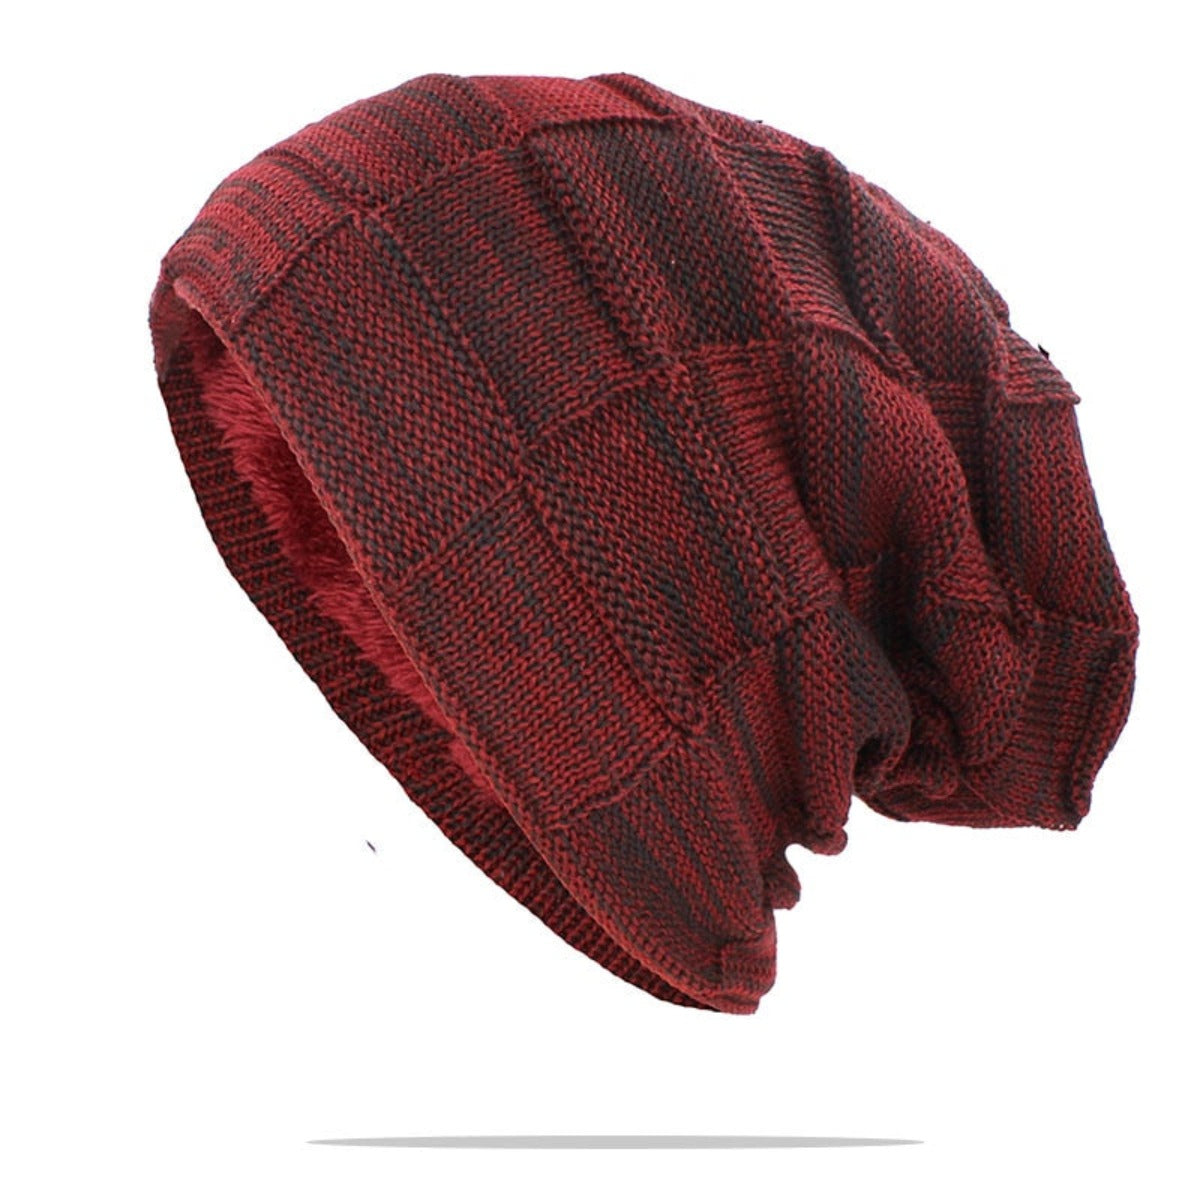 A high-quality, Casual Winter Knitted Beanie Hat in red and black on a white background.